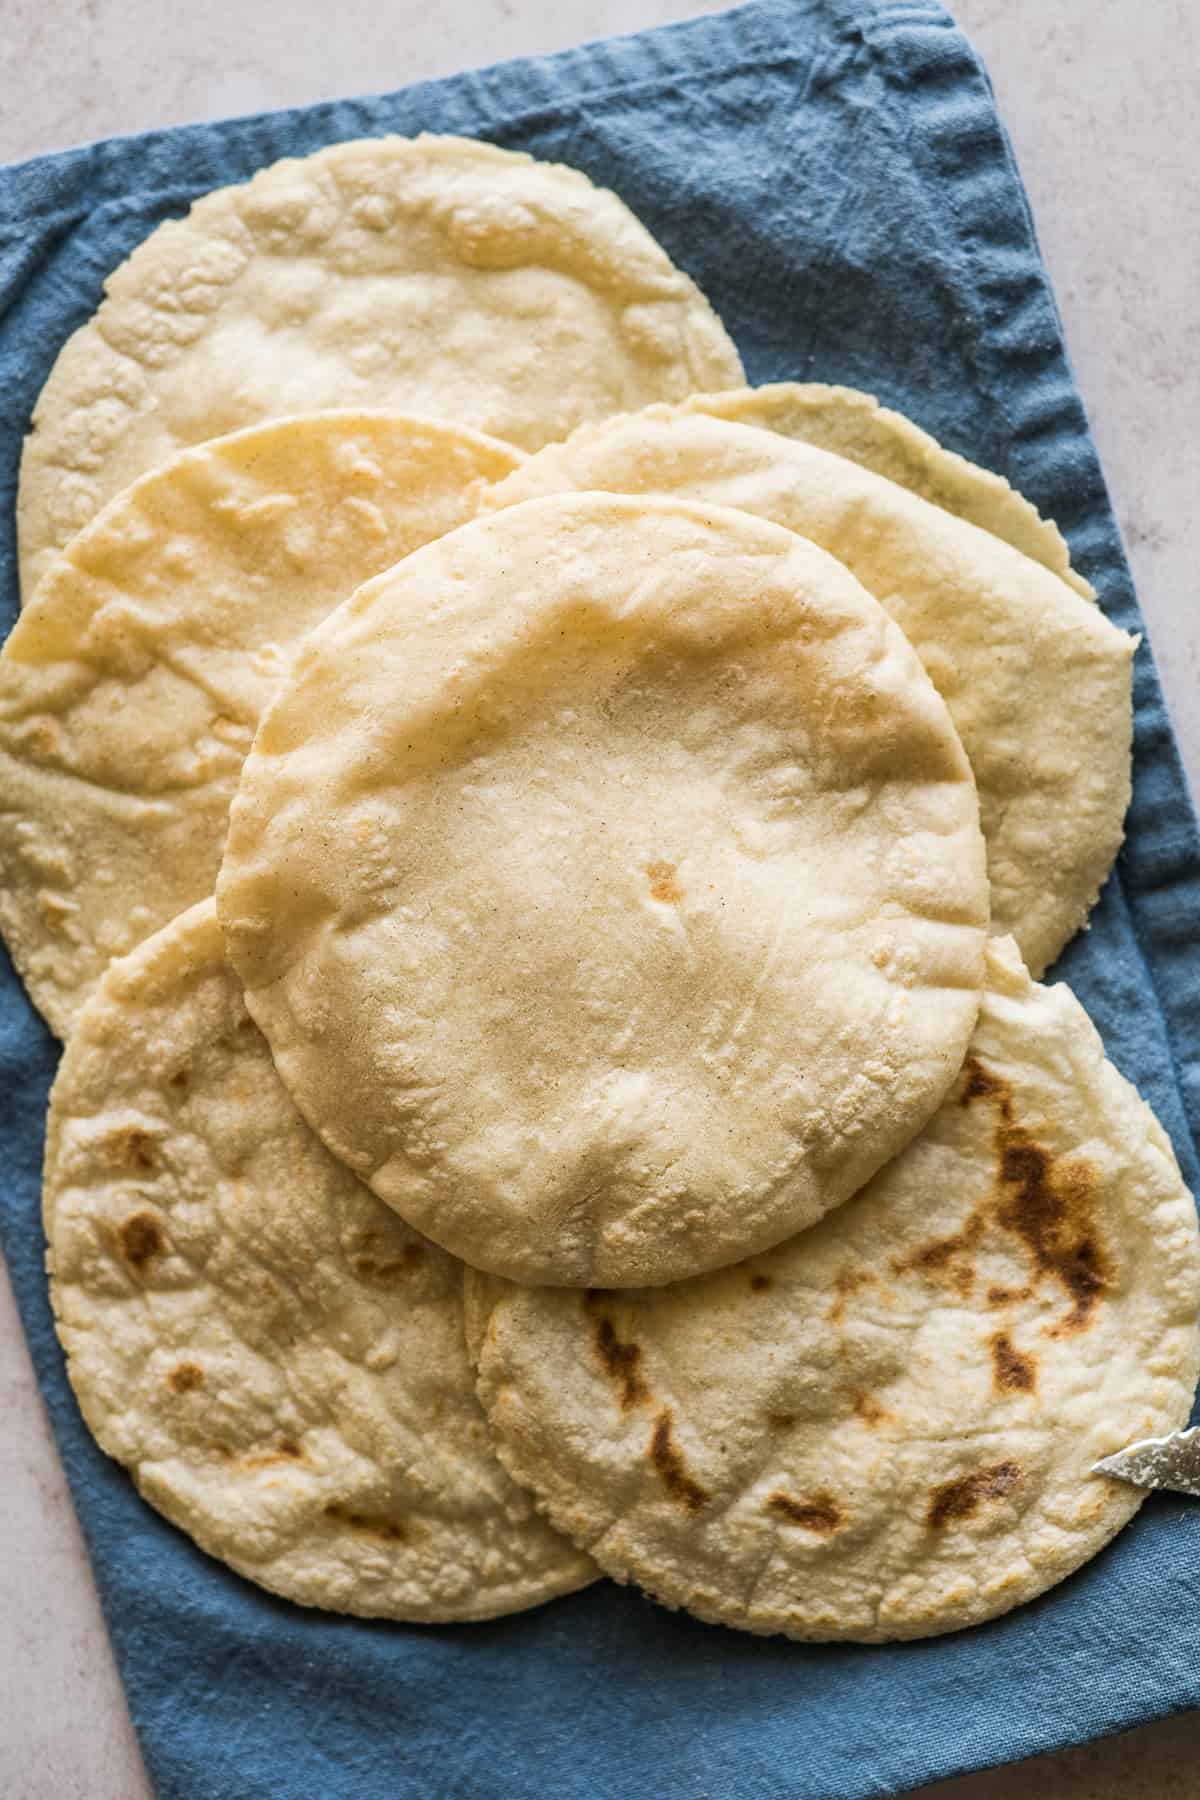 Cooked gorditas on a towel ready to be filled.